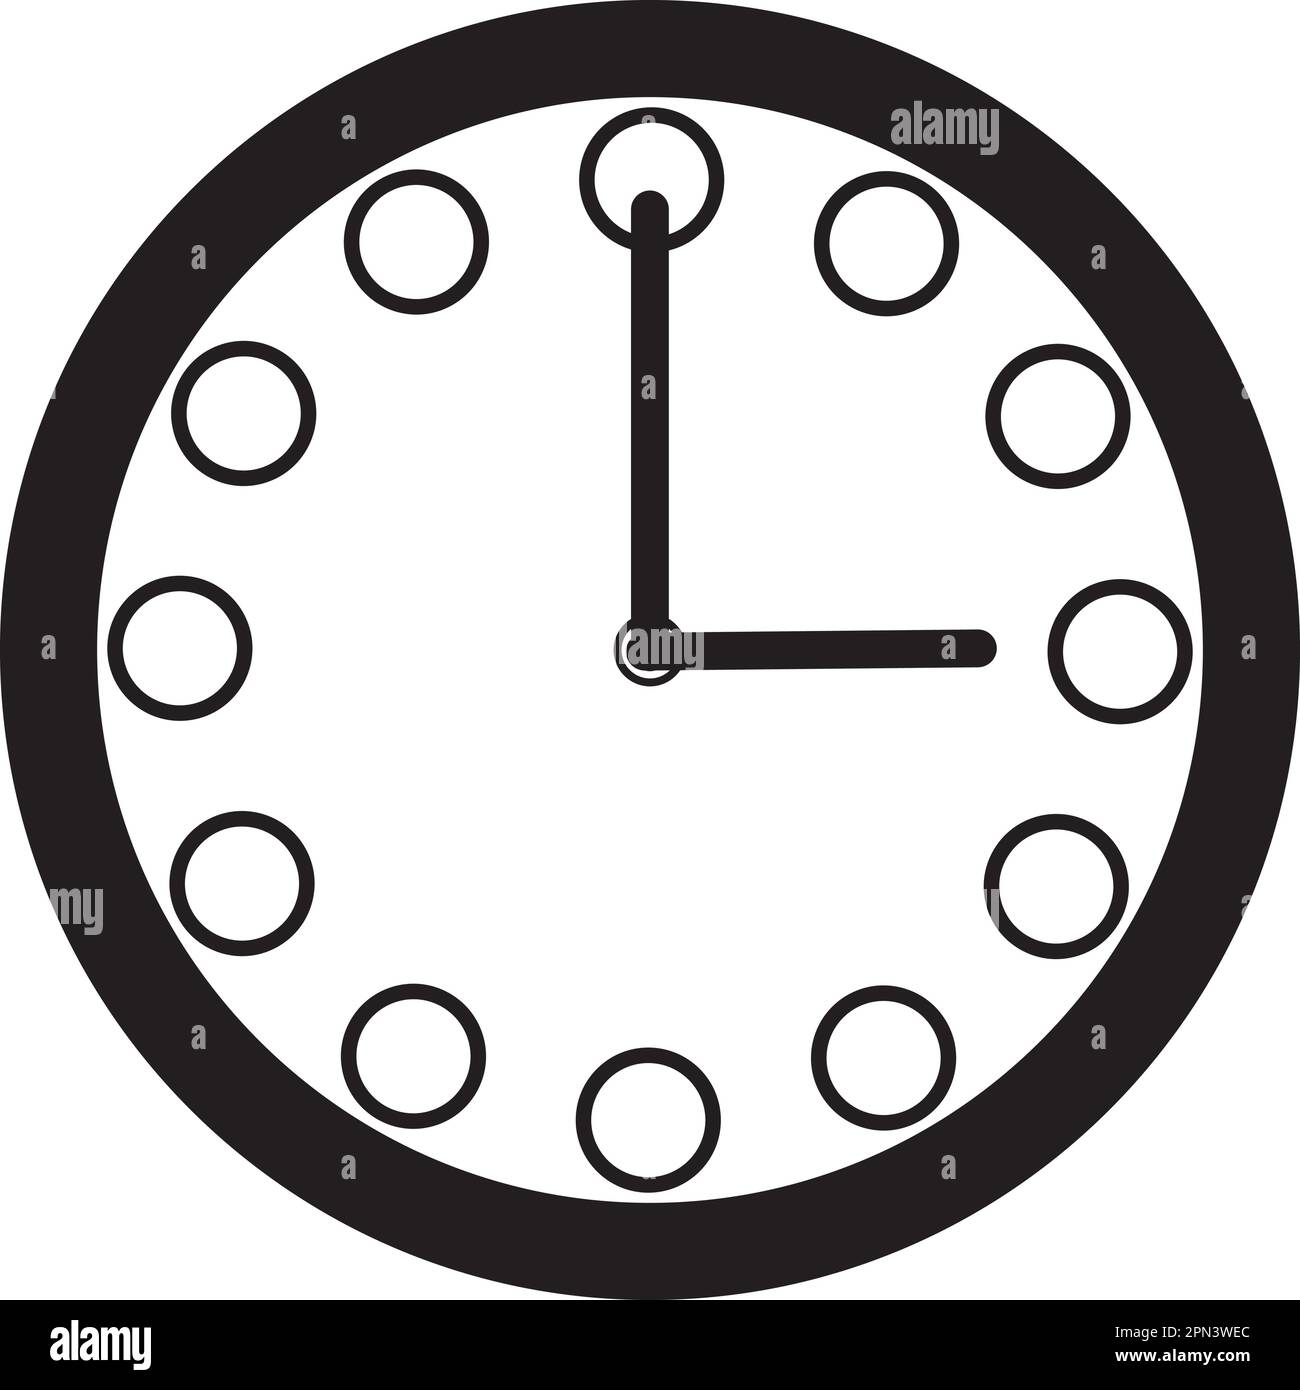 A Black and White Clock Icon of a Circular Face with Twelve Hour Markers, Two Hands for Indicating the Time Stock Vector